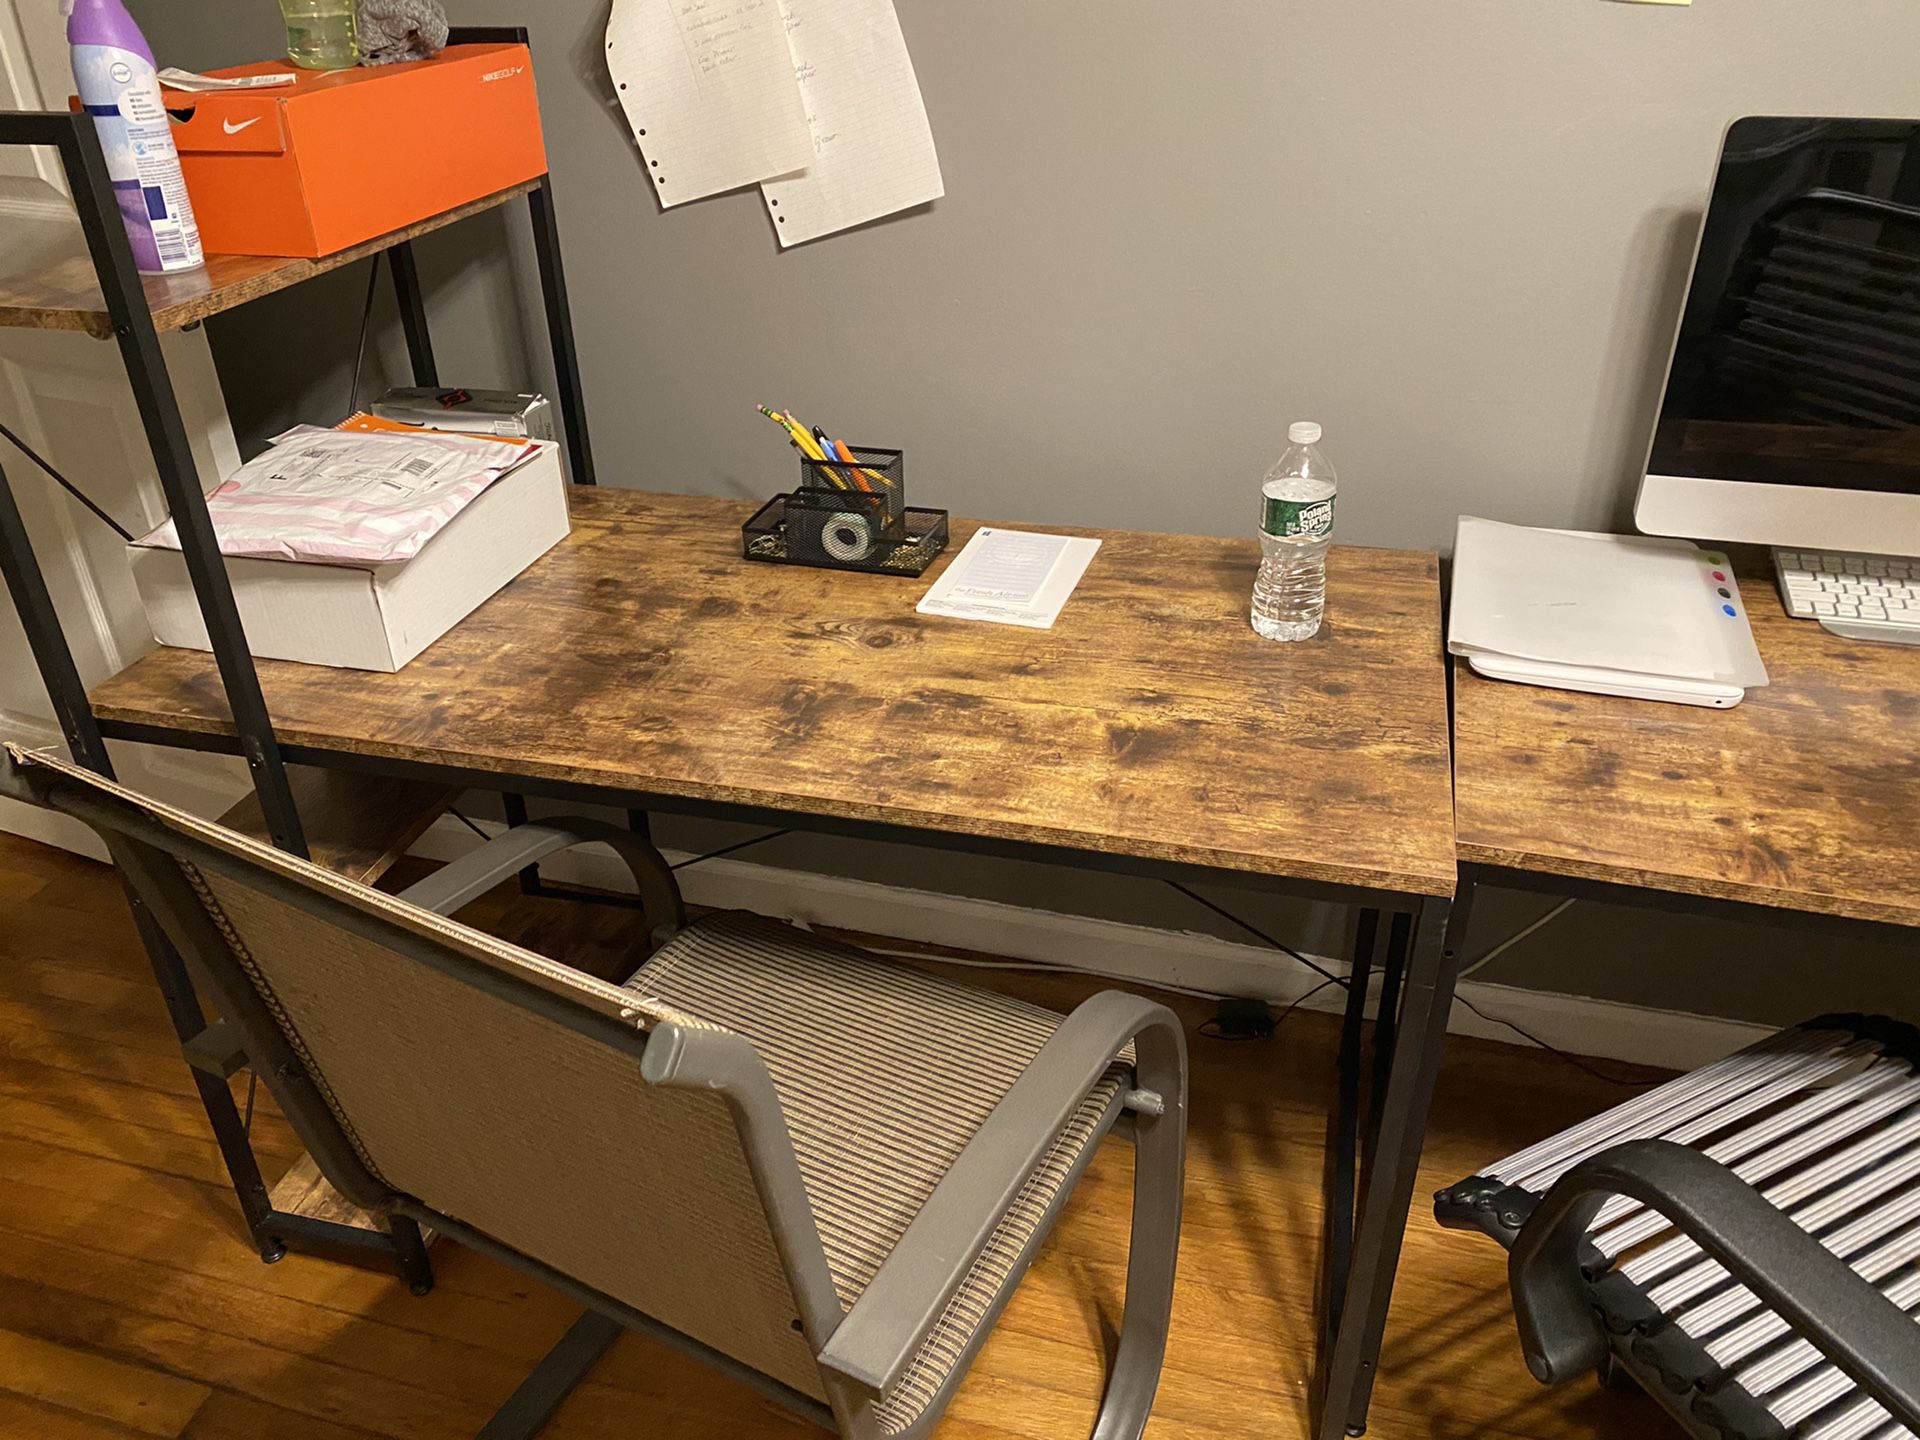 2 desks with shelves that join together “optional” 1 corner desk 1 table double benches slide under perfect for reading blueprints or for breakfast